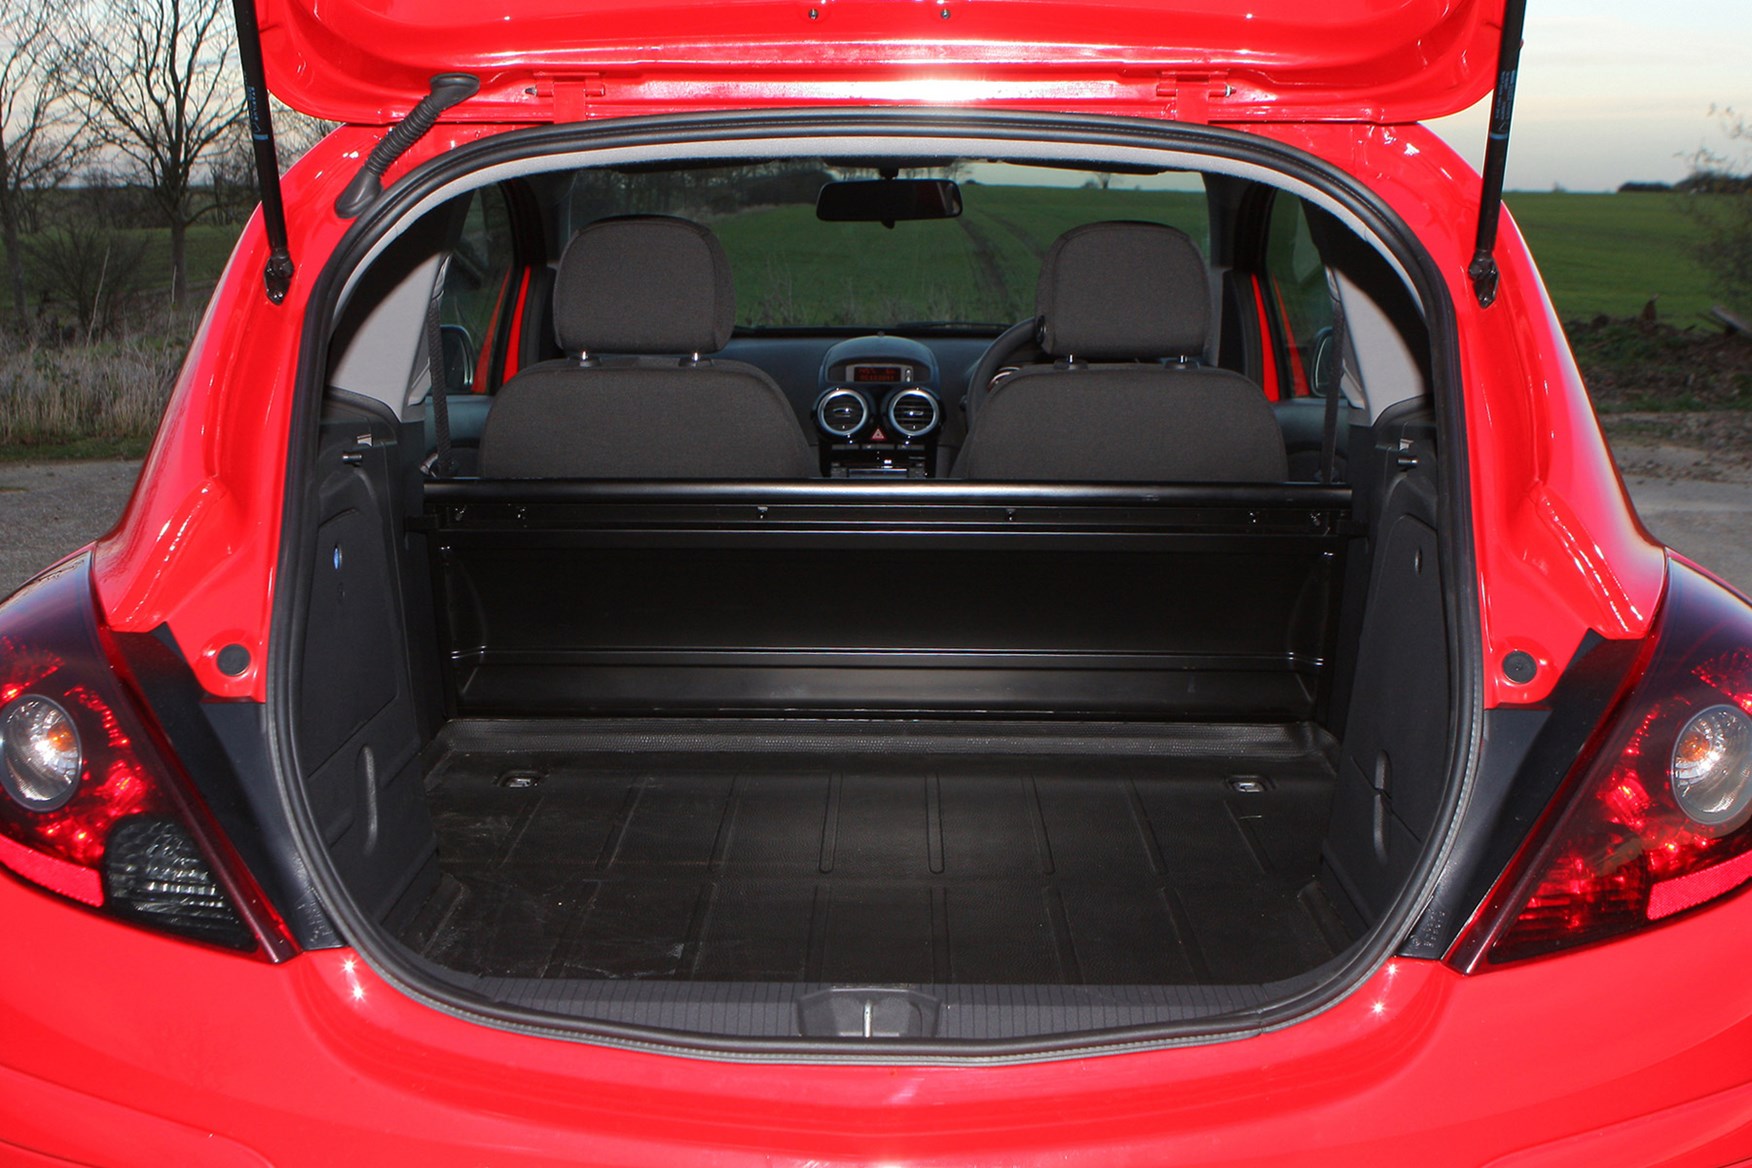 Vauxhall Corsa review on Parkers Vans - load area